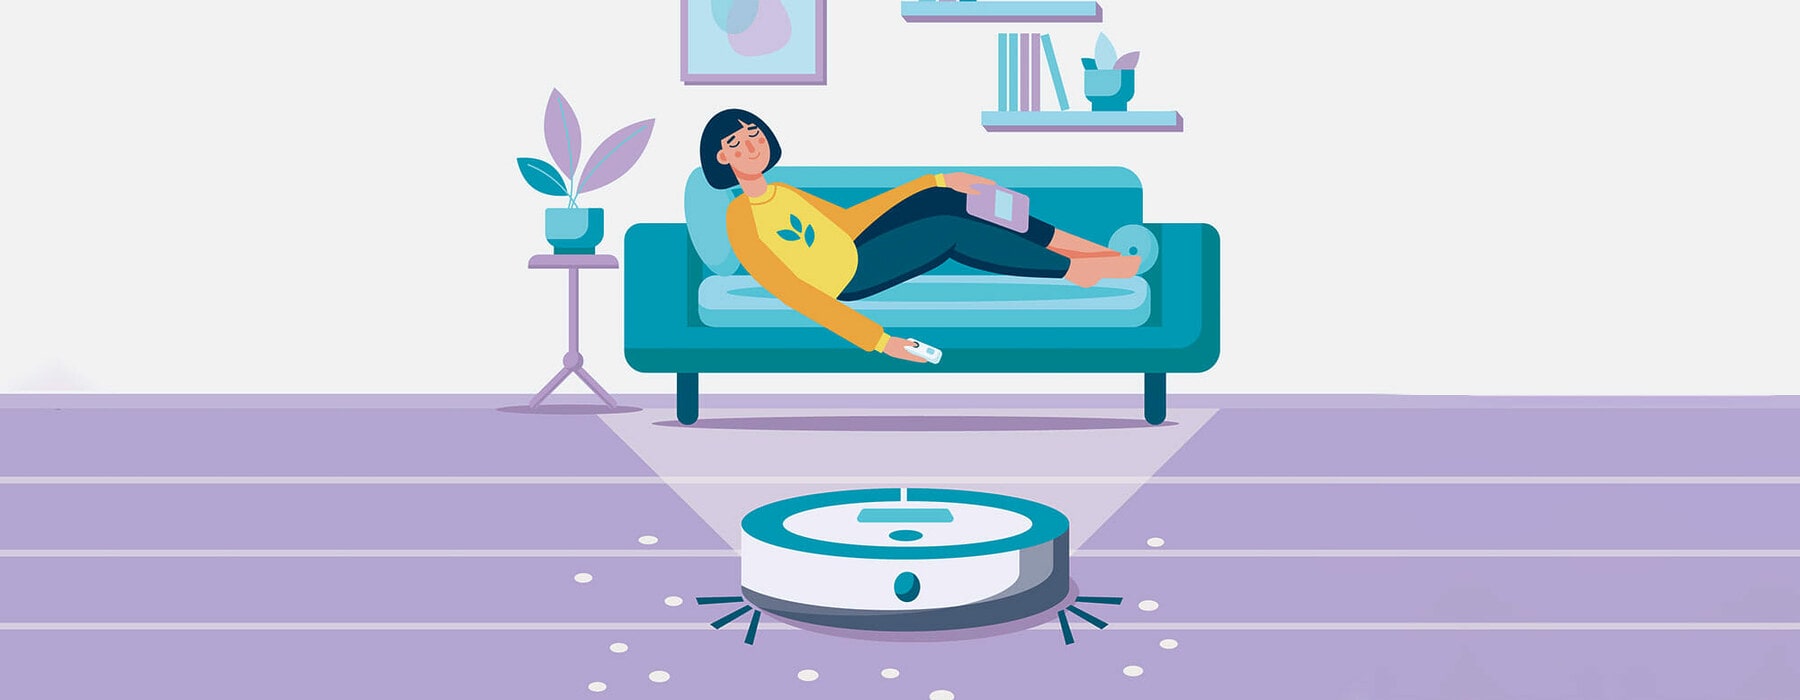 Young woman sleeping, relaxing on sofa and robot vacuum cleaner in the room. Modern wireless equipment for cleaning the apartment. Housework and technology concept.